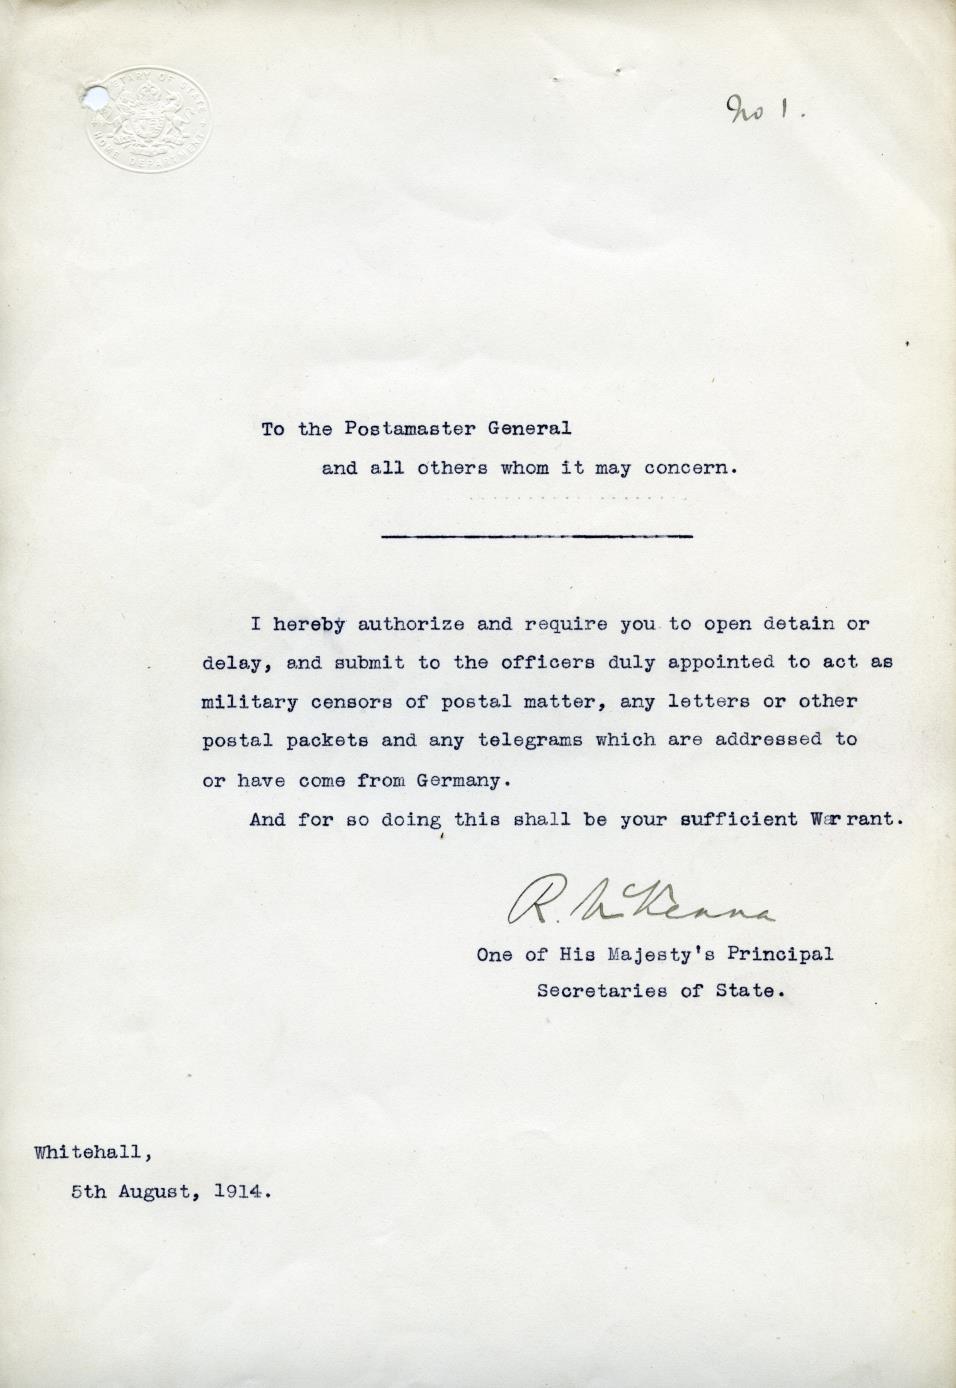 Royal Mail Group Ltd 2014, courtesy of The Postal Museum, POST 56/55 This letter dated 5 th August 1914 is from